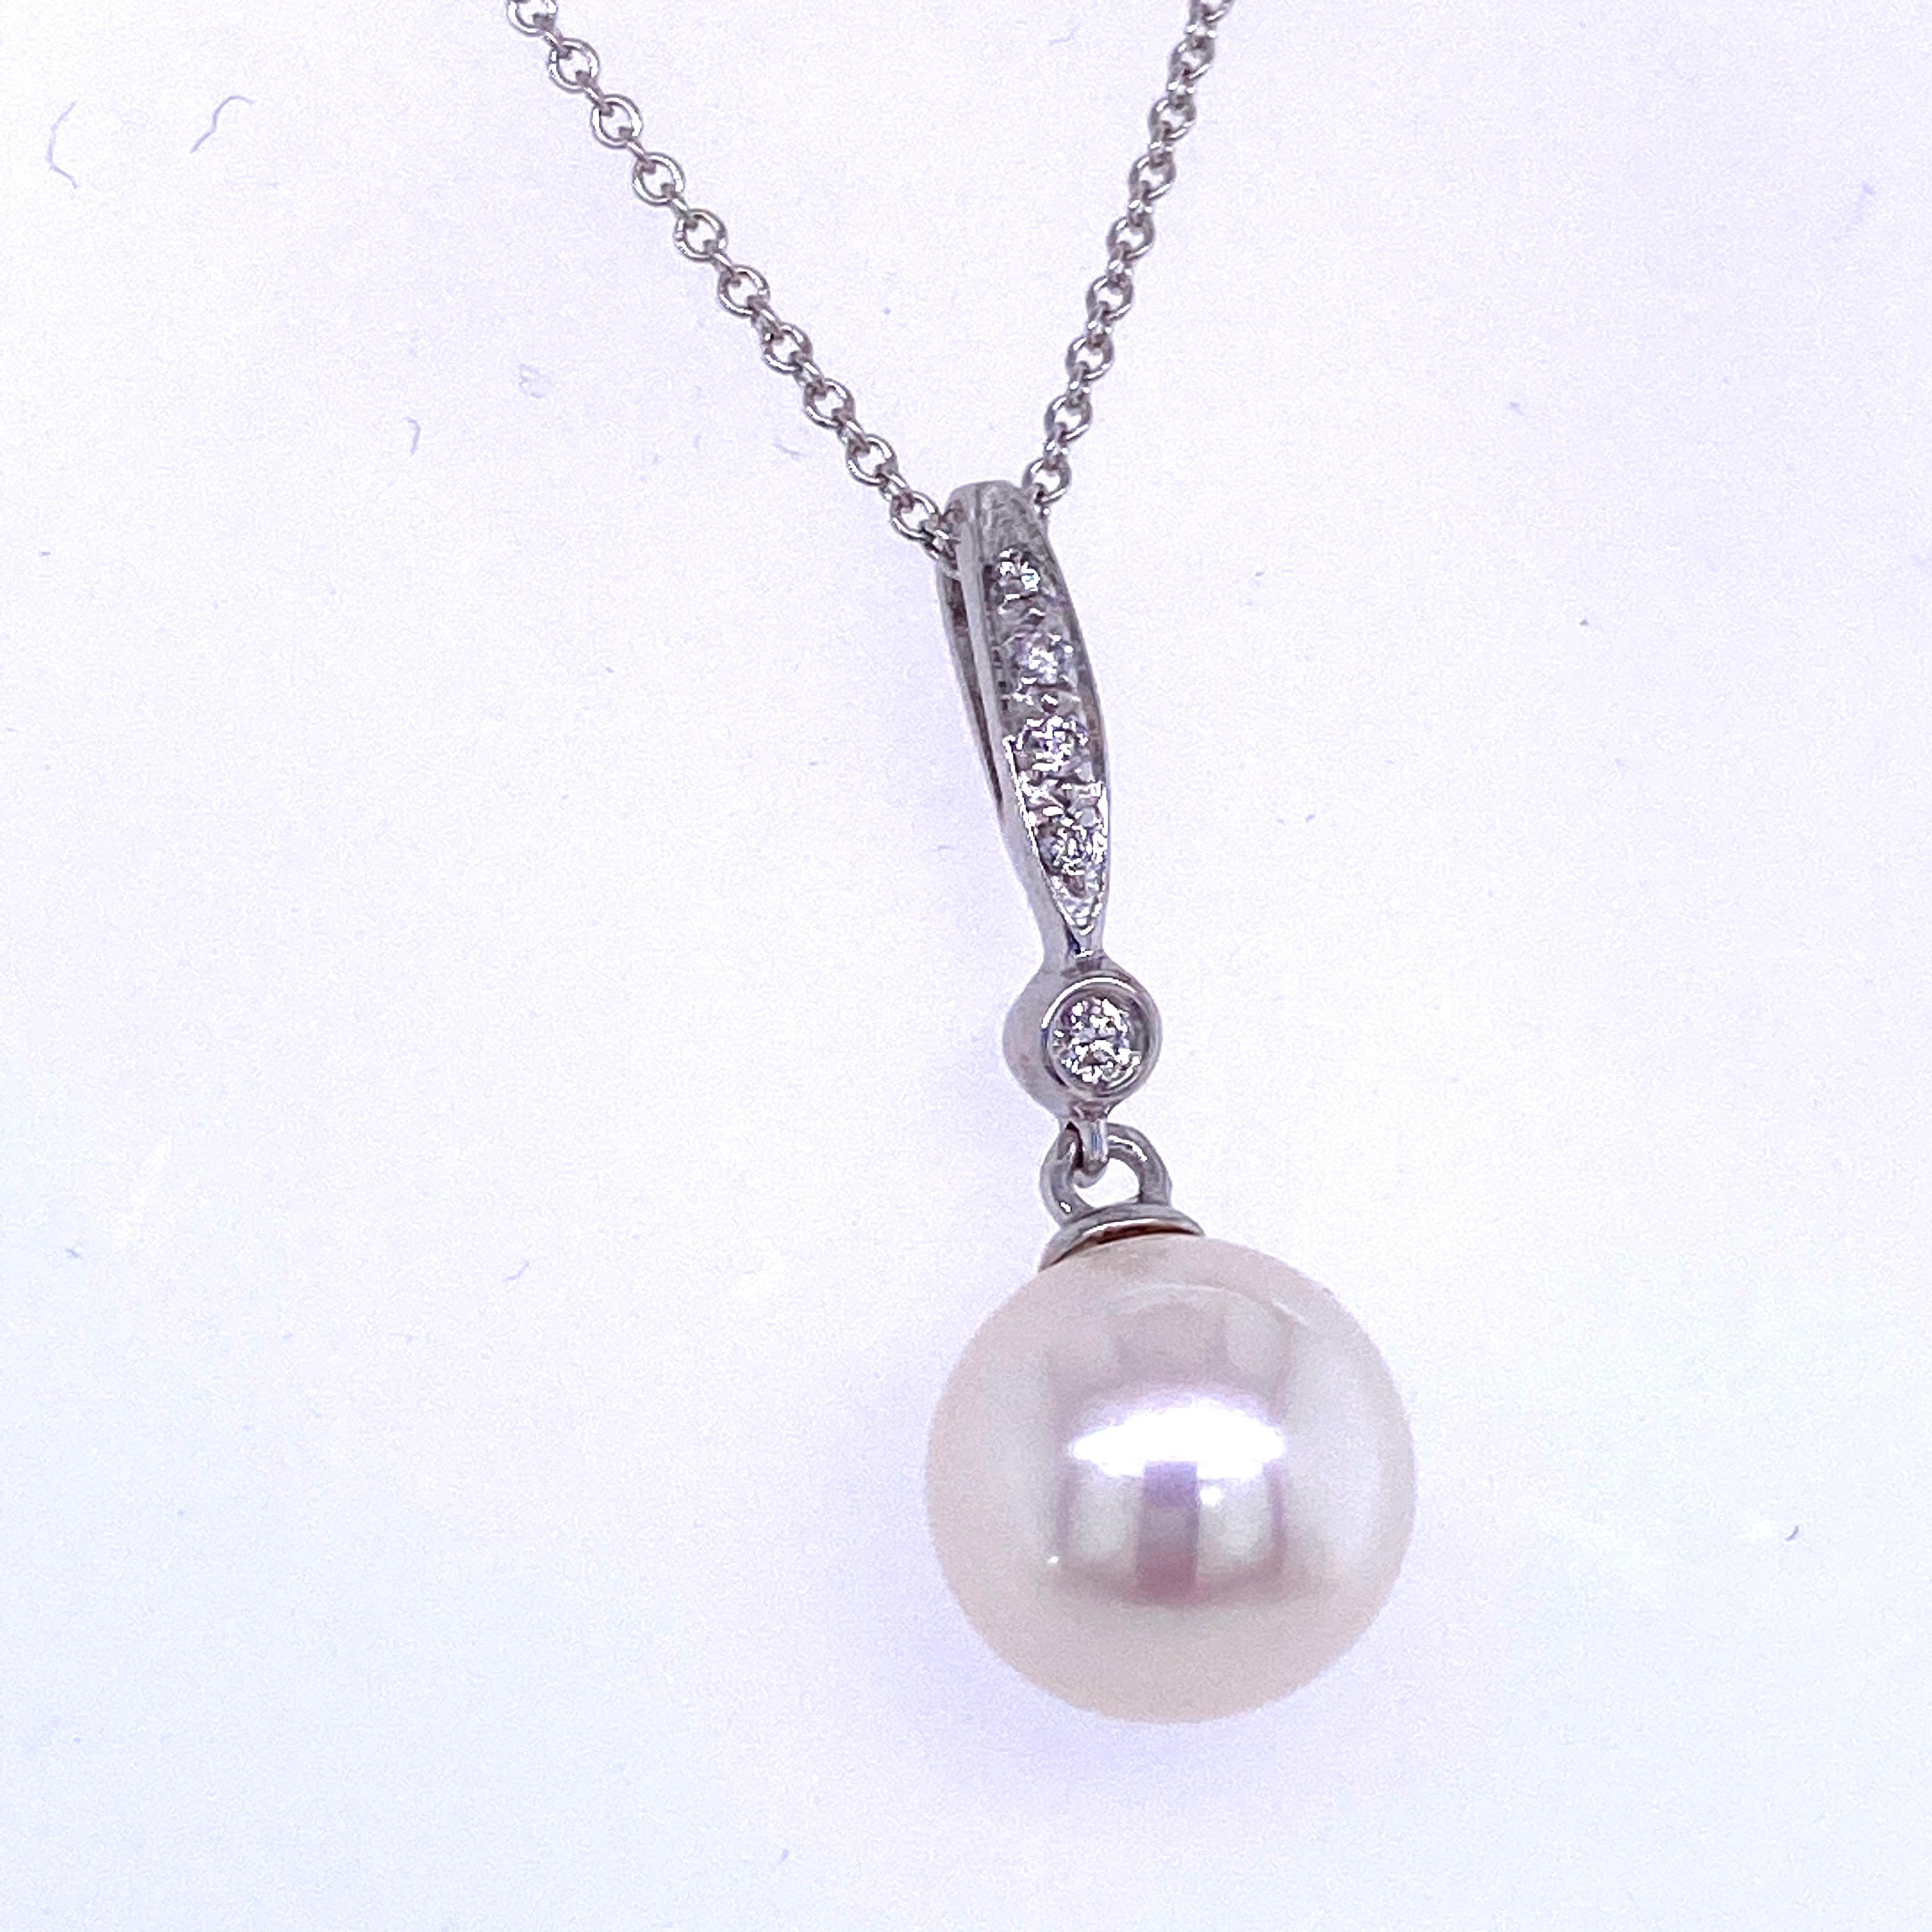 14K White gold pendant necklace featuring one Freshwater pearl measuring 8-9 mm with a diamond bar weighing 0.03 carats.
Color G-H
Clarity SI

Pearl can be changed to South Sea, Tahitian, Pink, or Golden.
Price subject to change 